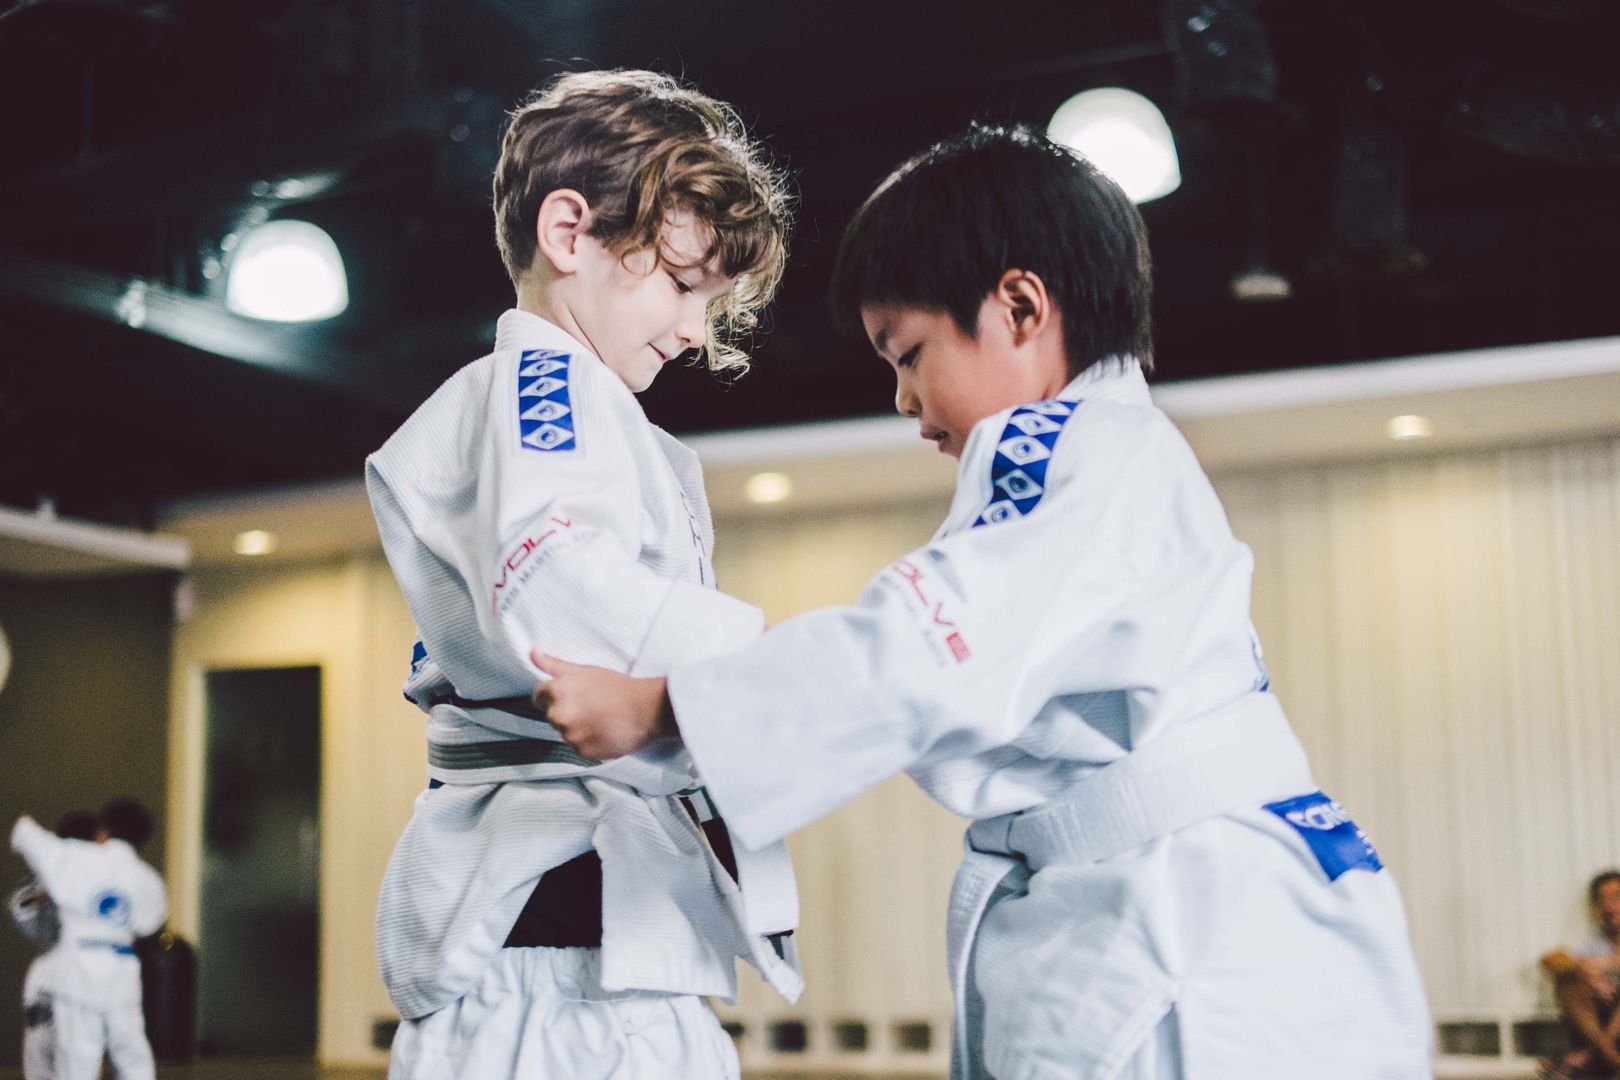 Keep your kids active by letting them train BJJ.